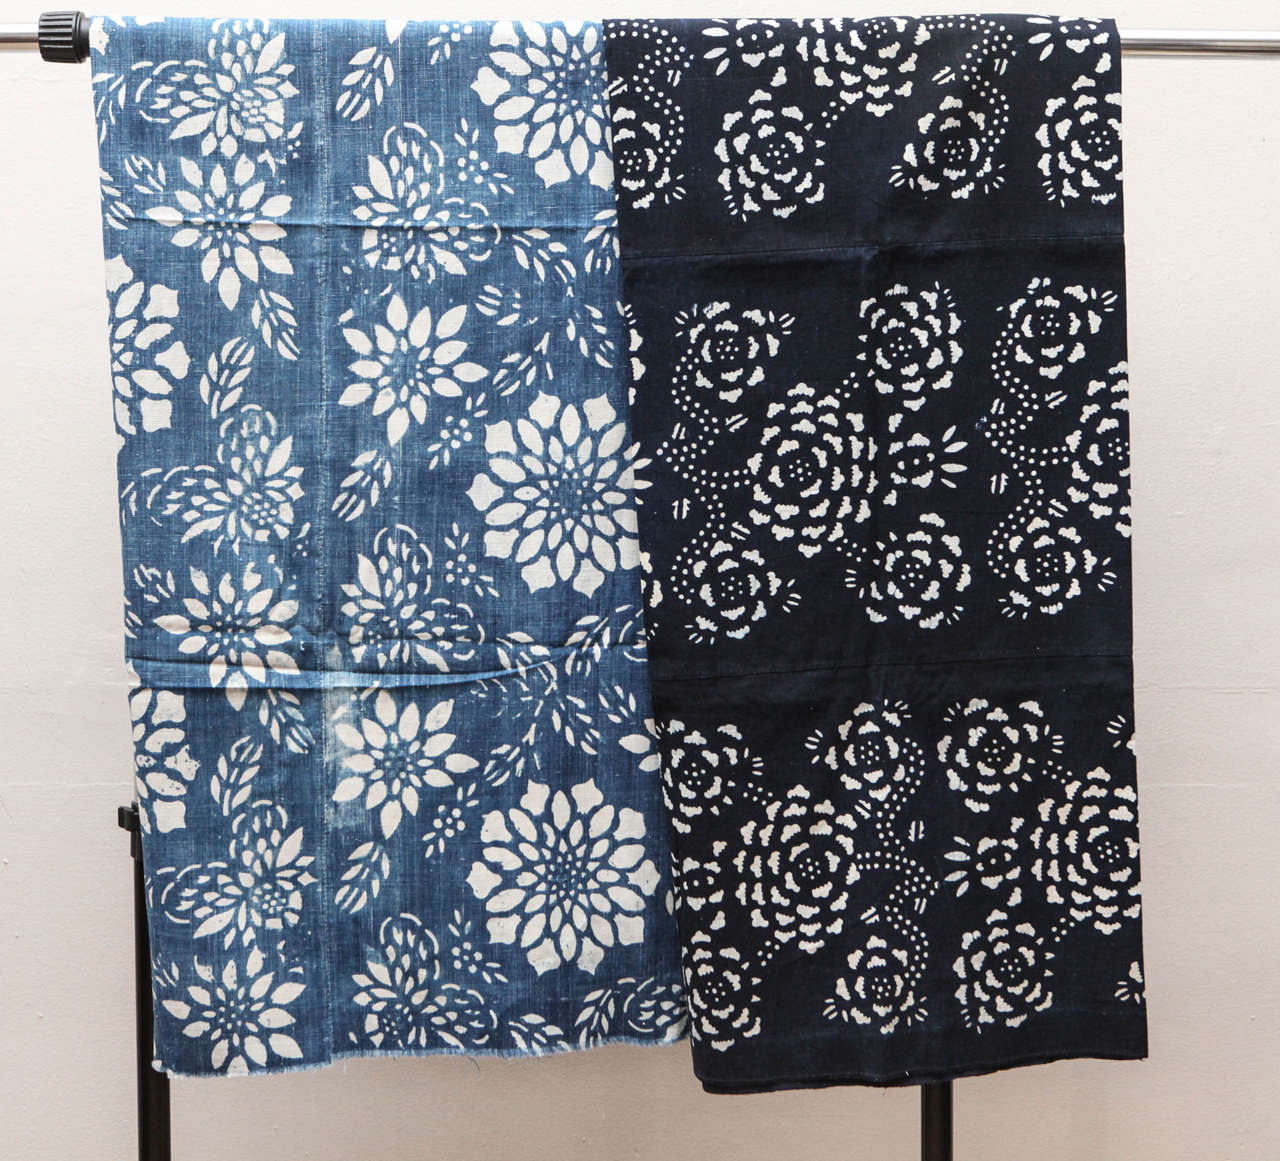 Resist dyed indigo cotton.  Each textile made up of three 16 inch panels
sewn together.  Priced individually at $650 each. 

Left - 52